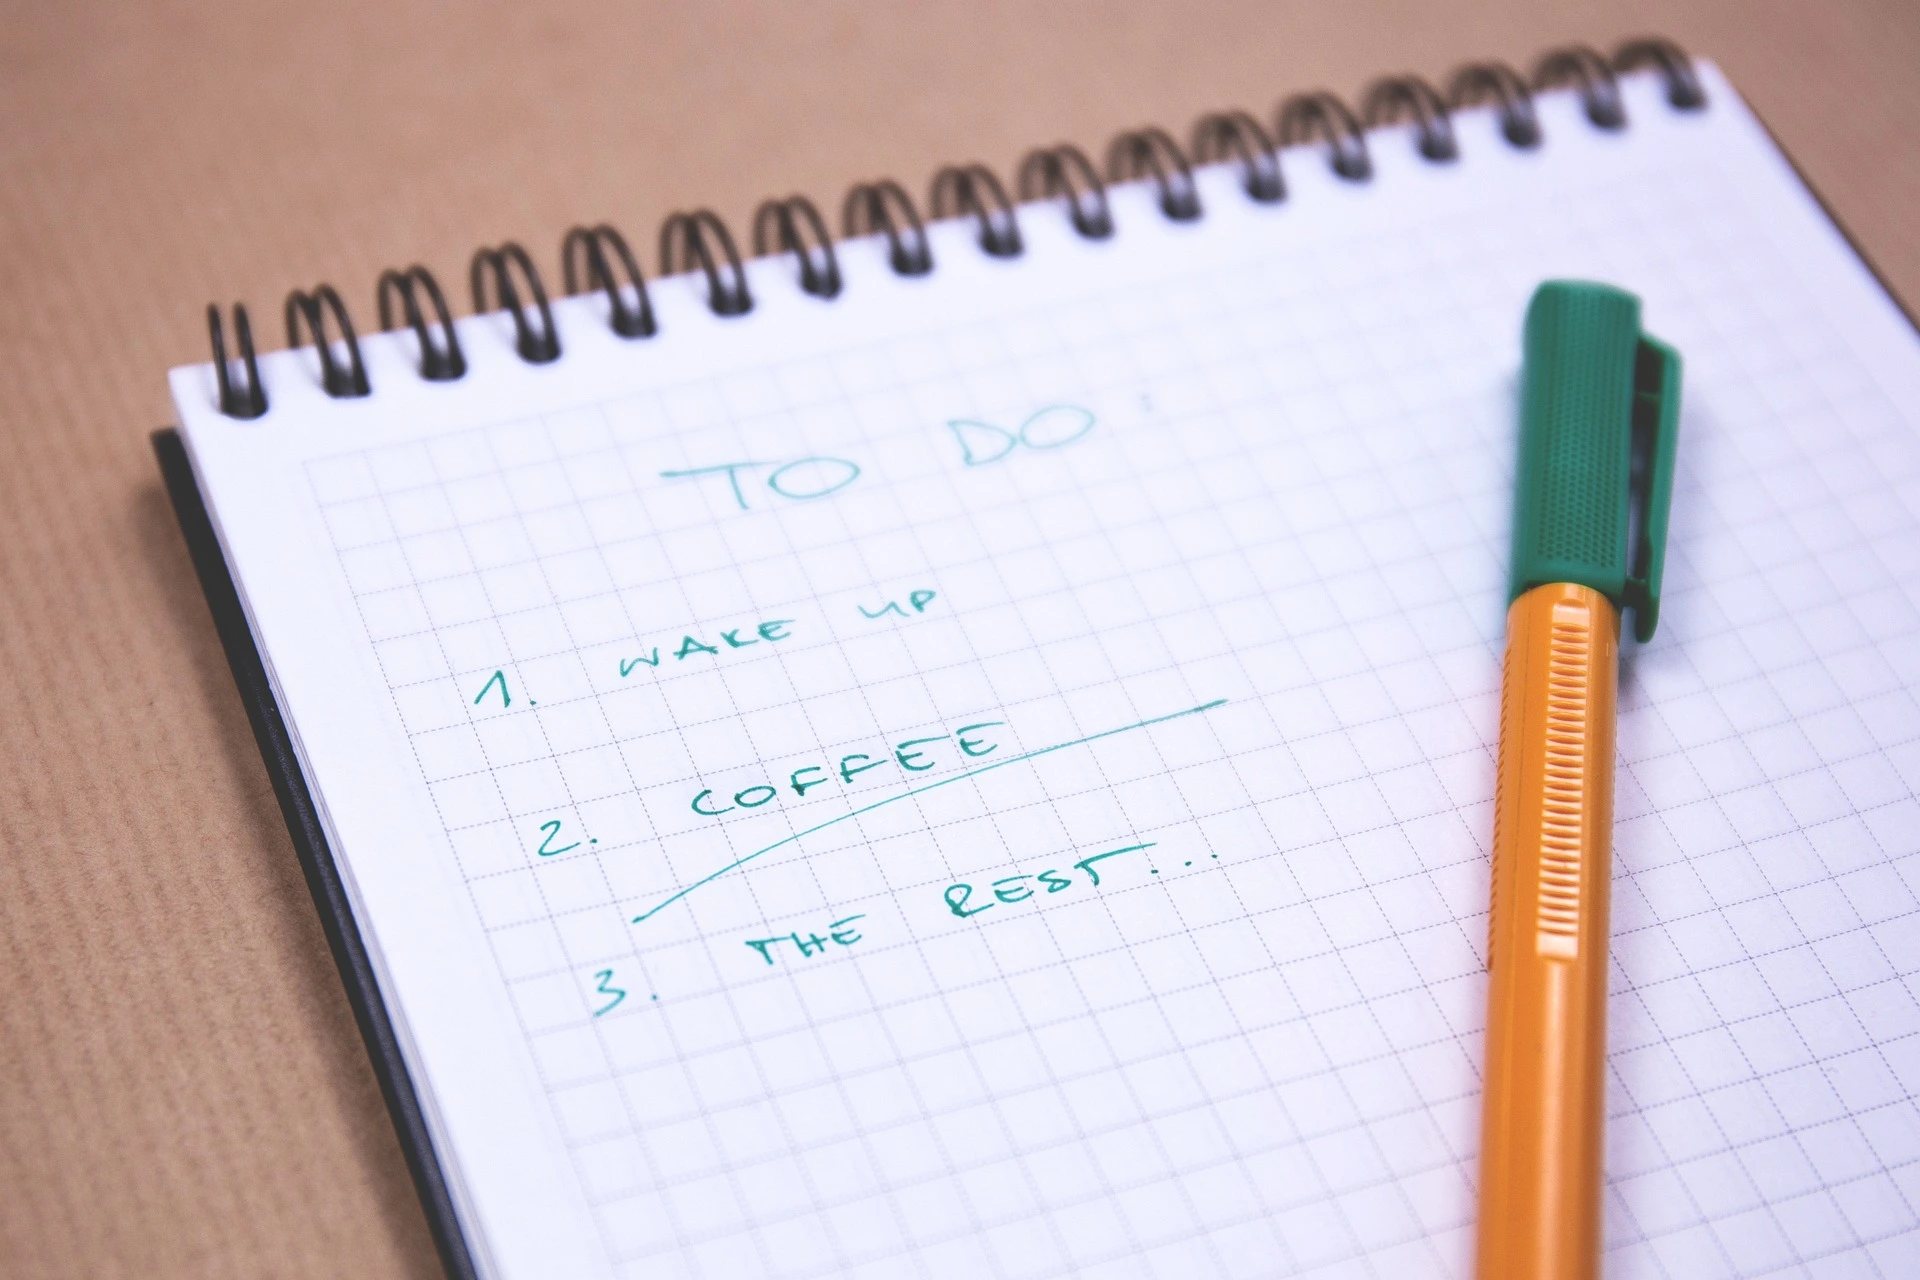 Notepad with a pen on top, containing a to-do list that says 1. Wake Up. 2. Coffee. 3. The rest.